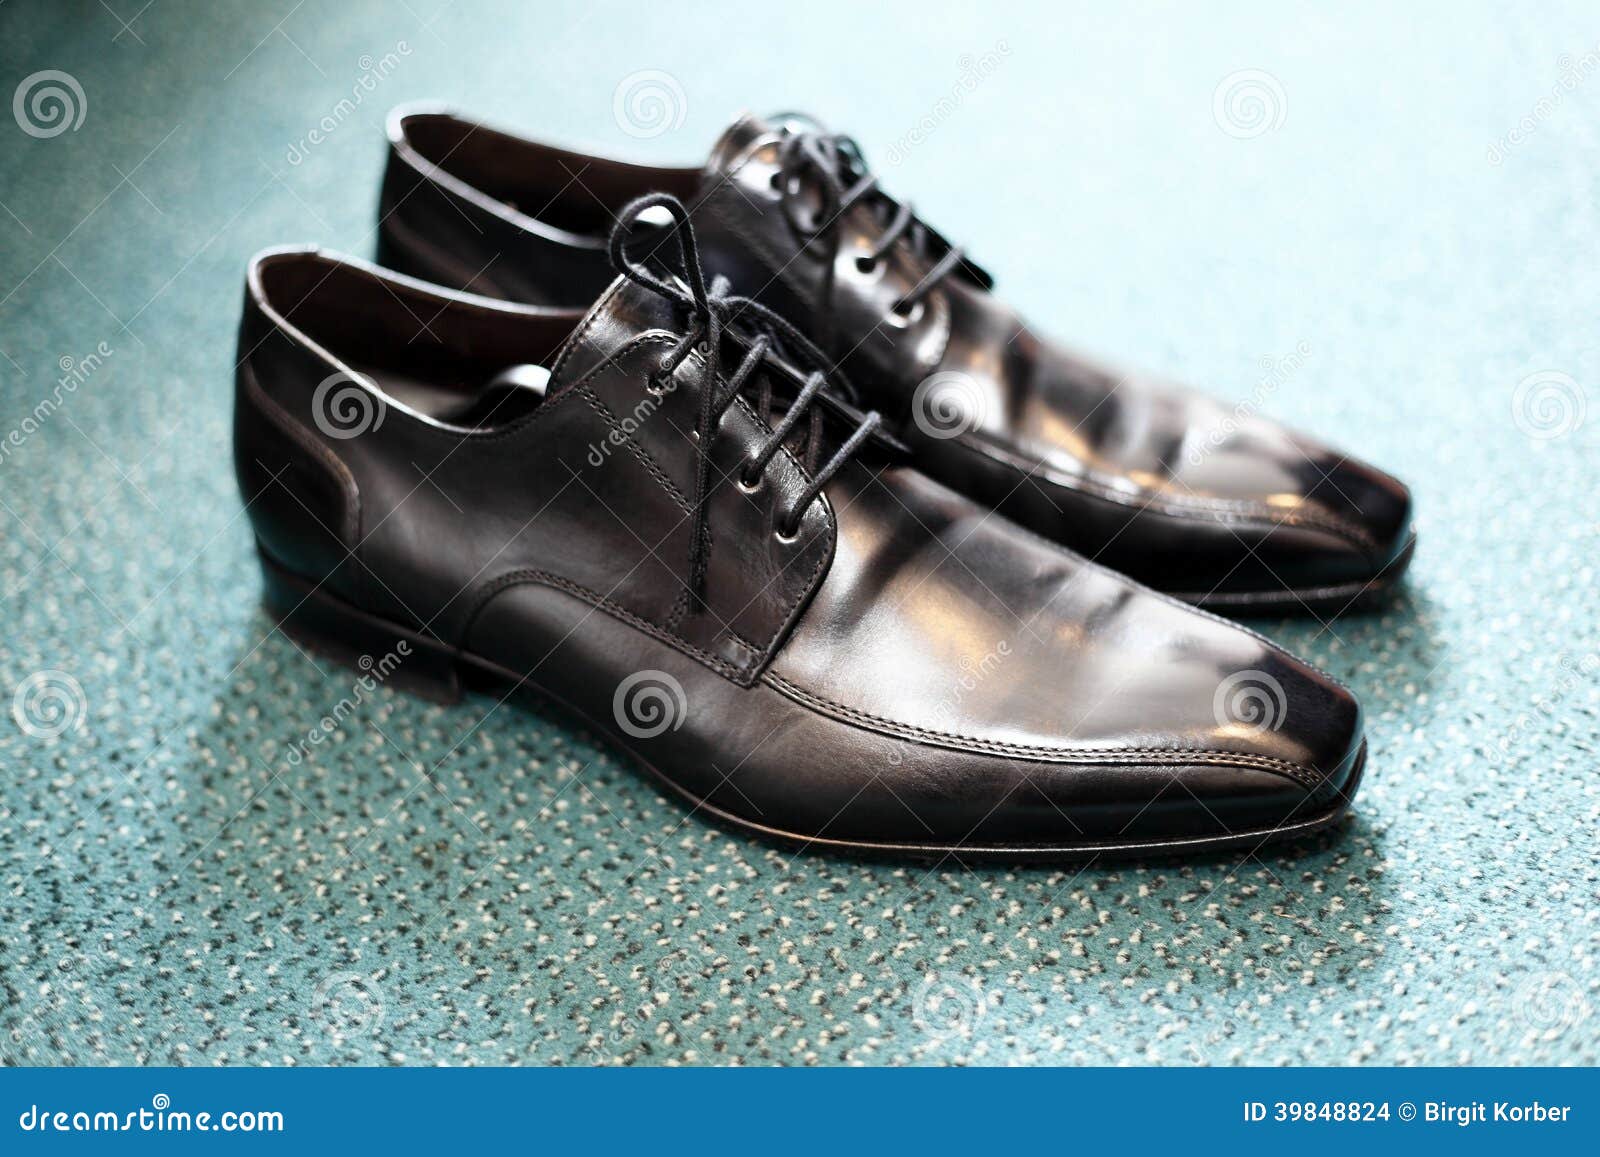 Black men shoes stock photo. Image of fixed, marry, marriage - 39848824